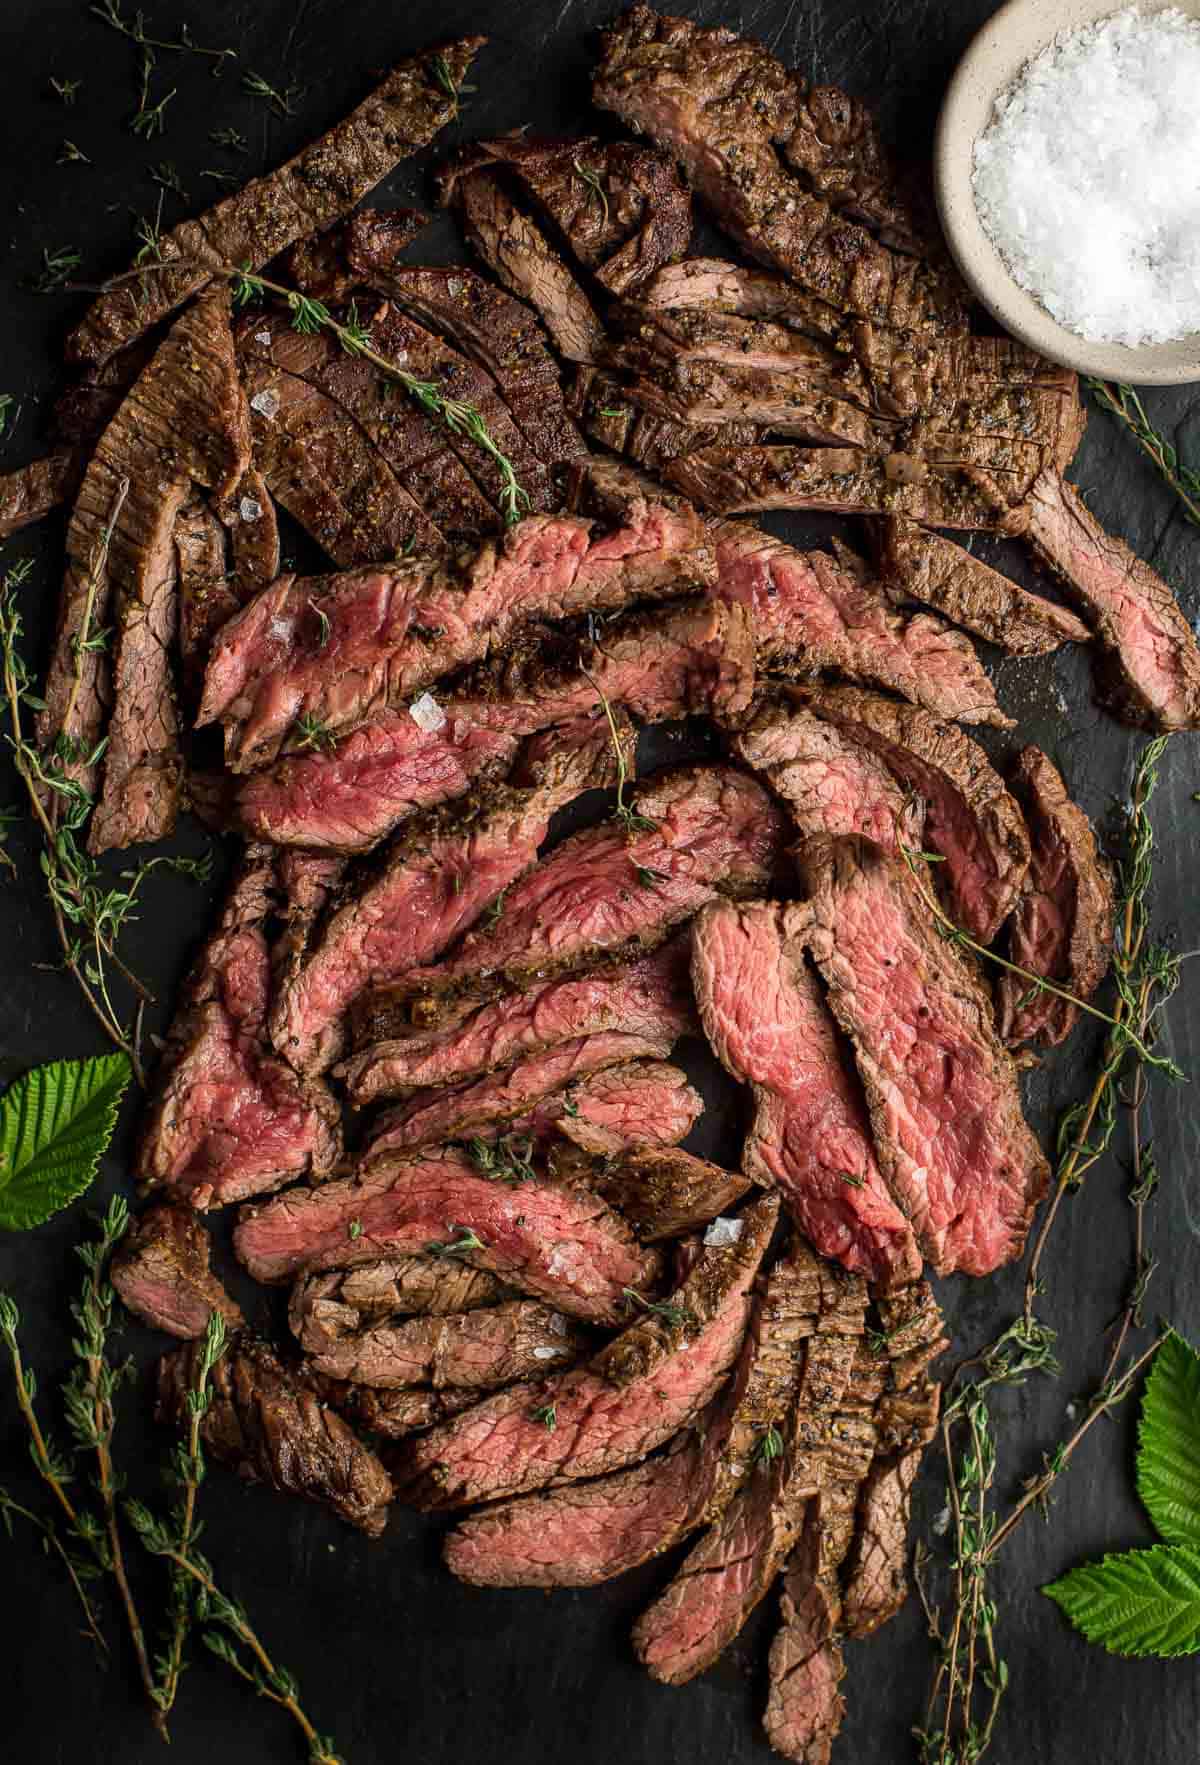 Grilled Bavette steak on a cutting board with a beer based Beef marinade.